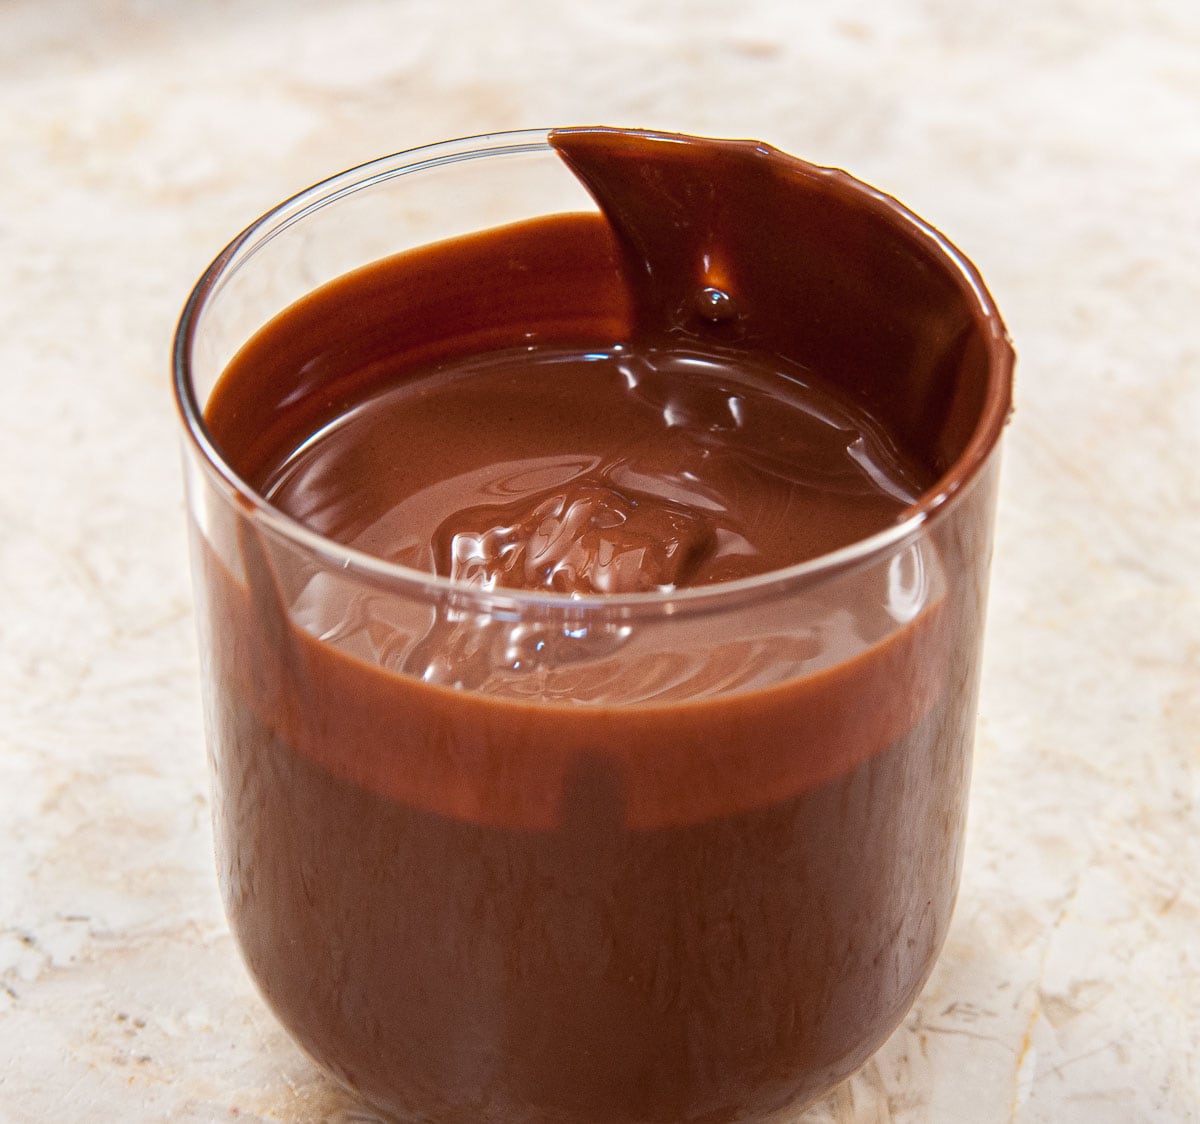 The melted chocolate  has been poured into a narrow glass to facilitate dipping.